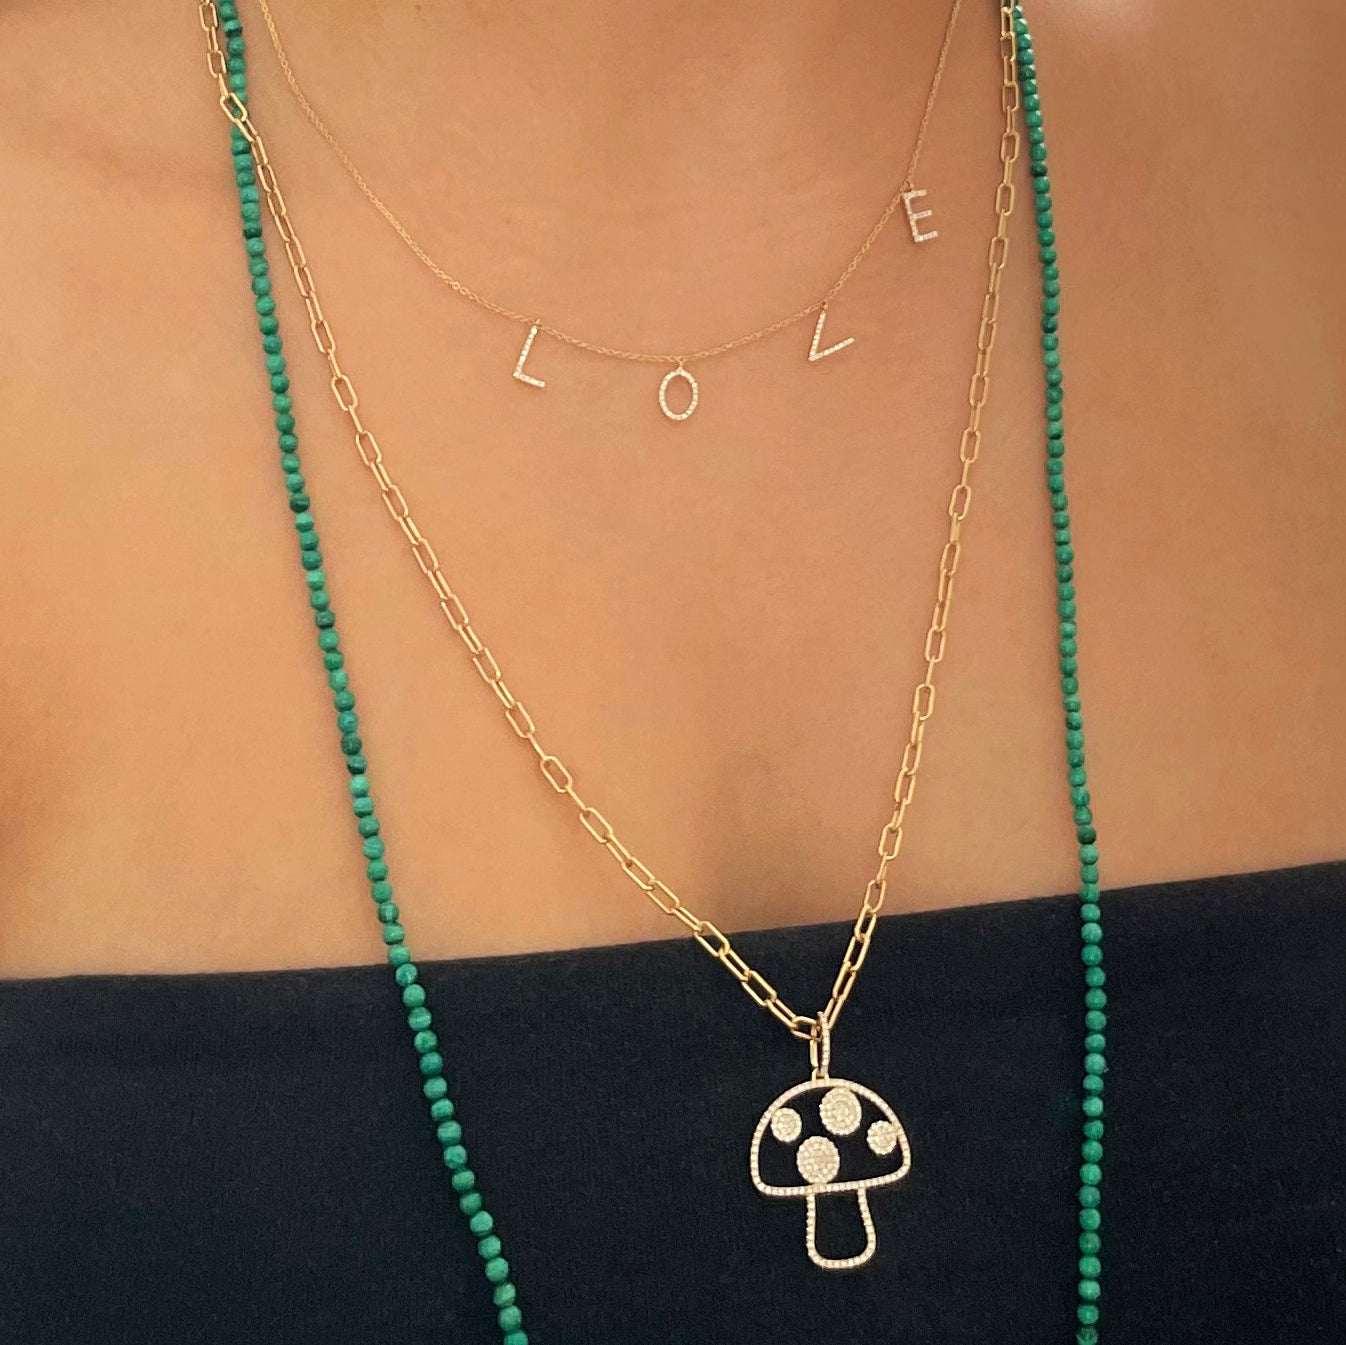 SEPARATED LOVE TEXT NECKLACE